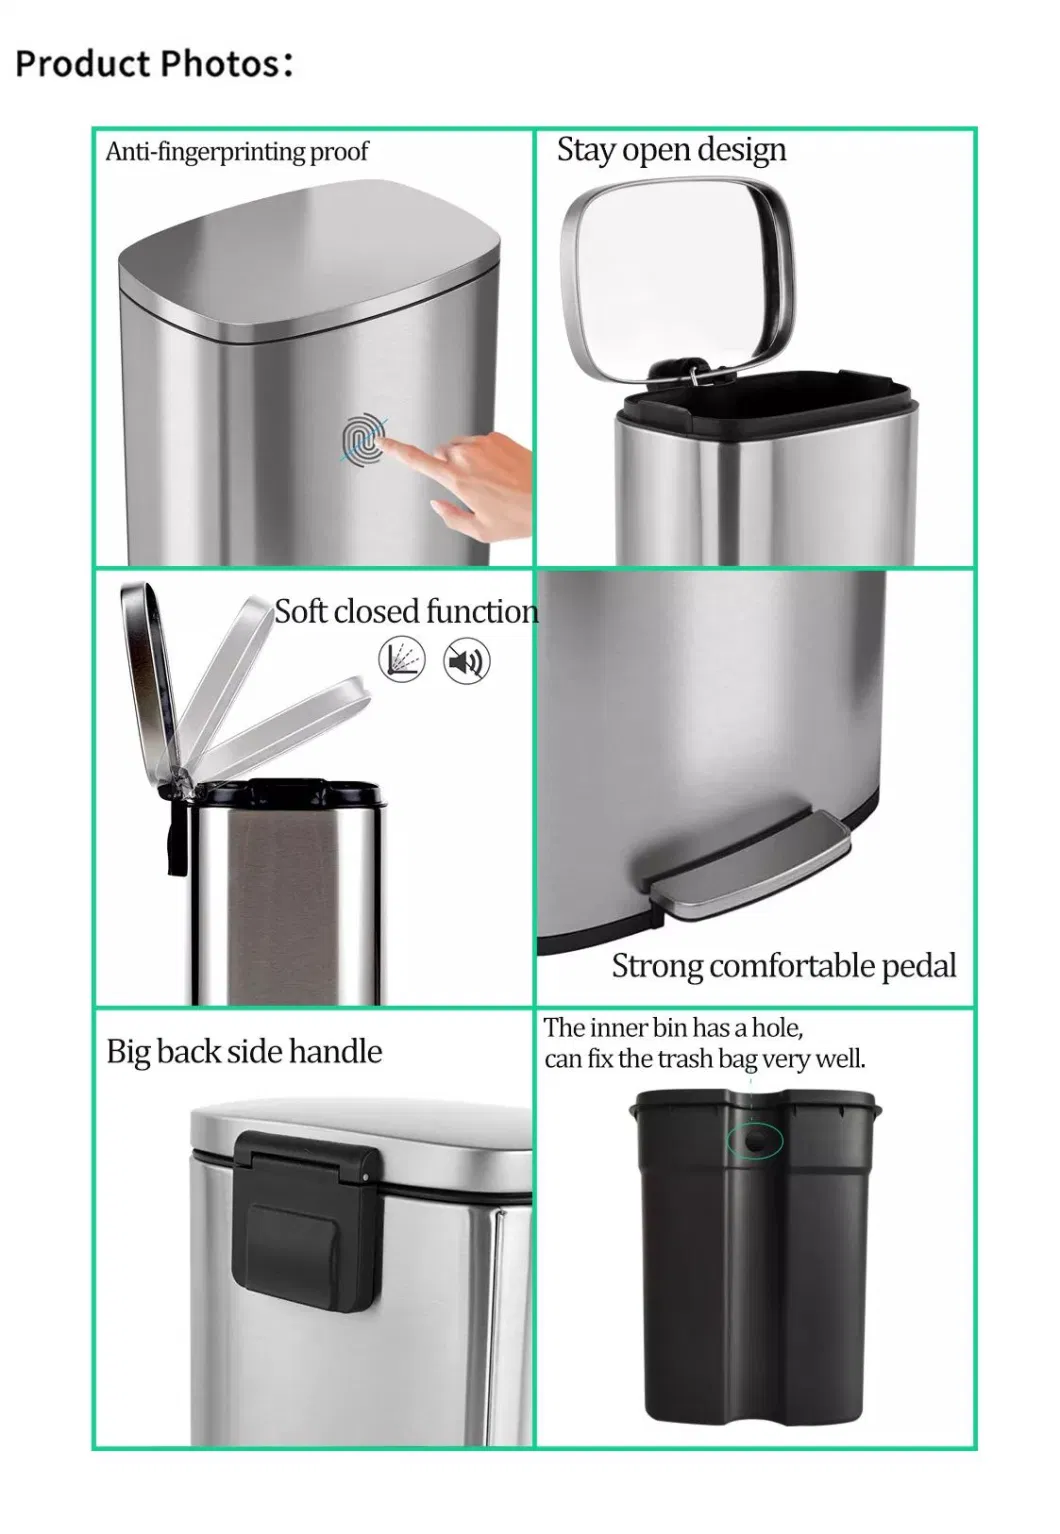 30L 50L Stainless Steel Metal Strong Kitchen Garbage Trash Can